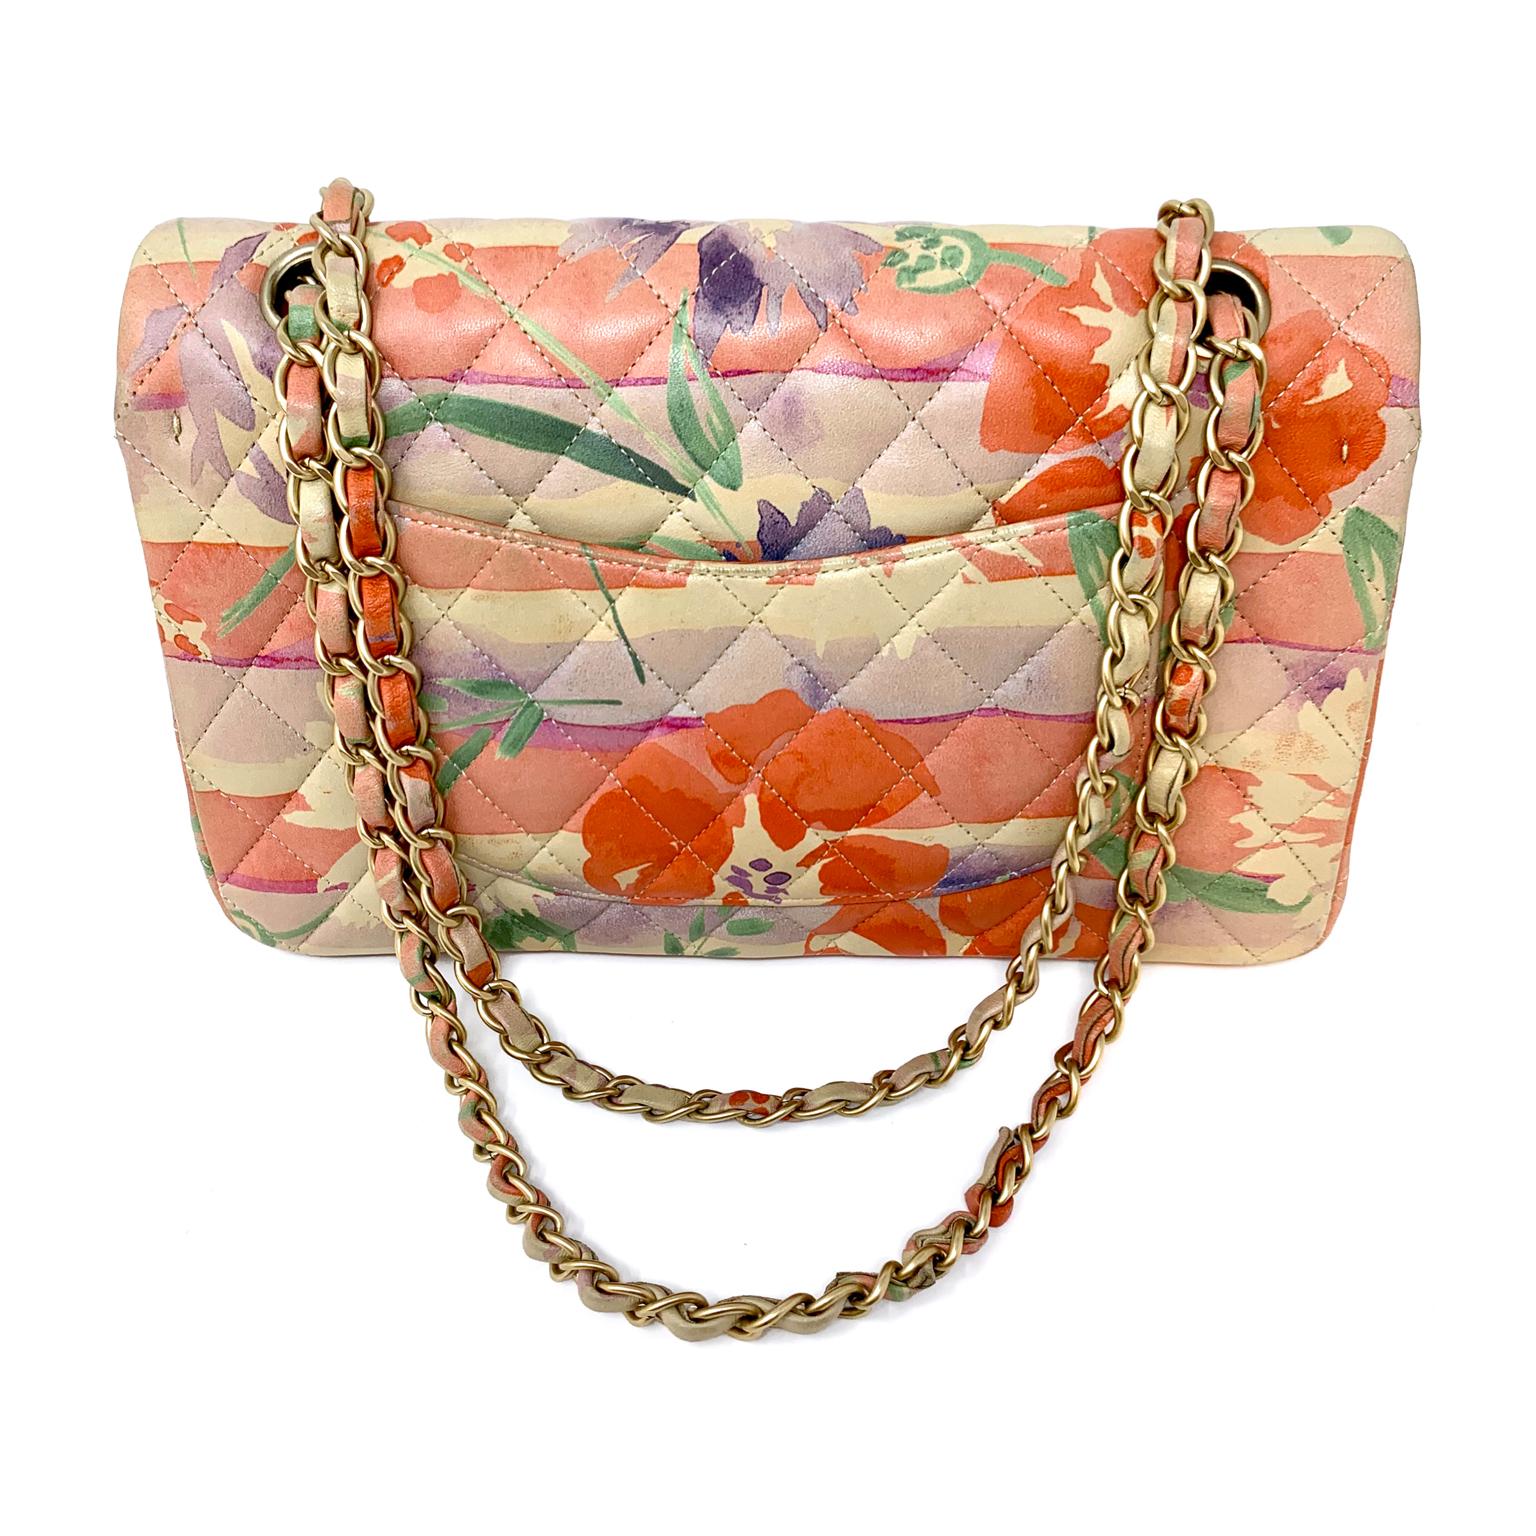 This authentic Chanel Floral Watercolor Double Flap Bag is in excellent condition.  Signature Chanel quilted leather design in serene multicolor floral.  Shades of orange, purple, green and blue flow together on a soft yellow- gold background. 